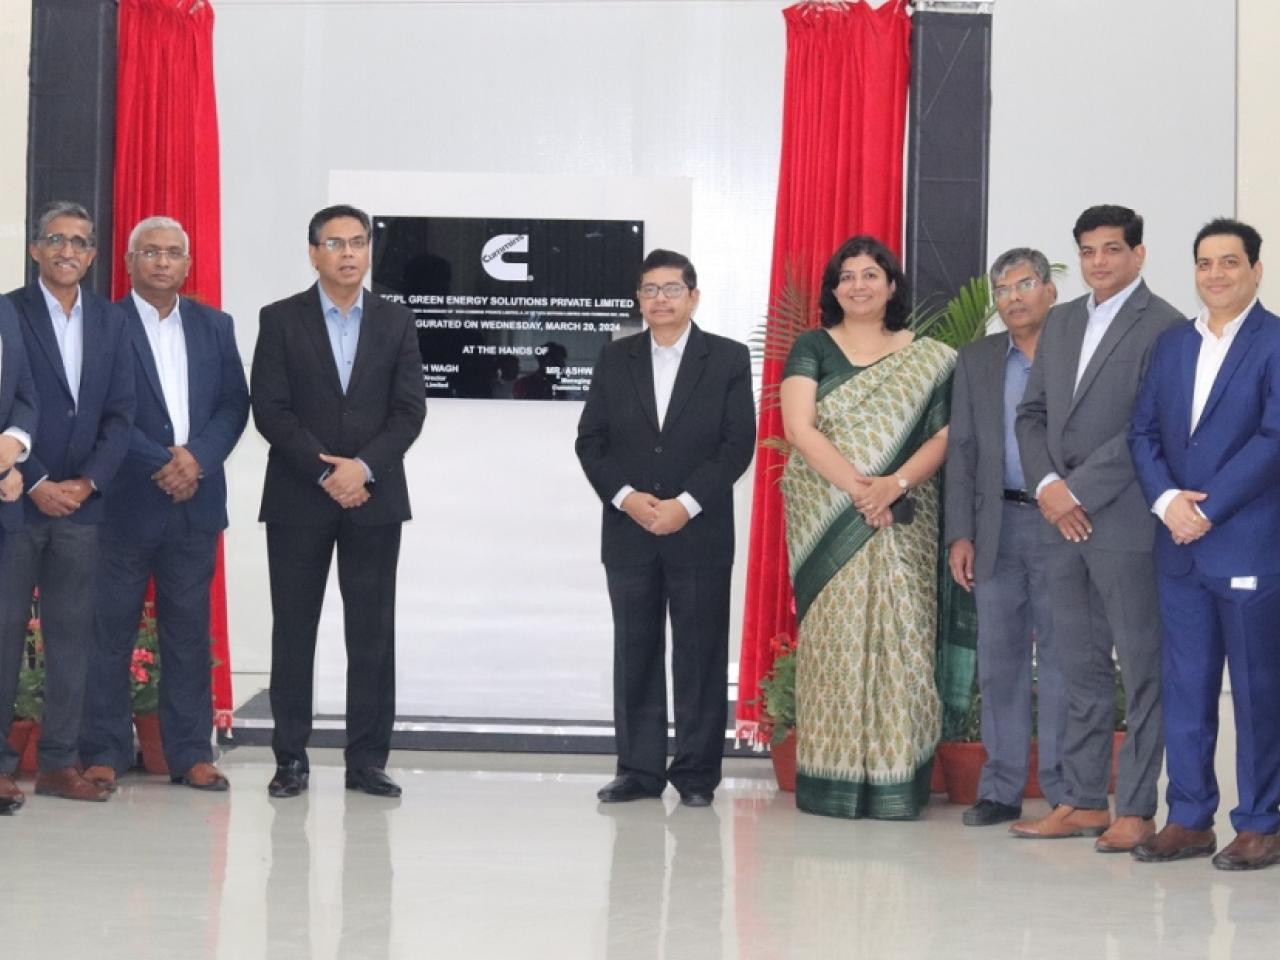 Leaders from Cummins Group and Tata Motors at the TCPL GES inauguration ceremony